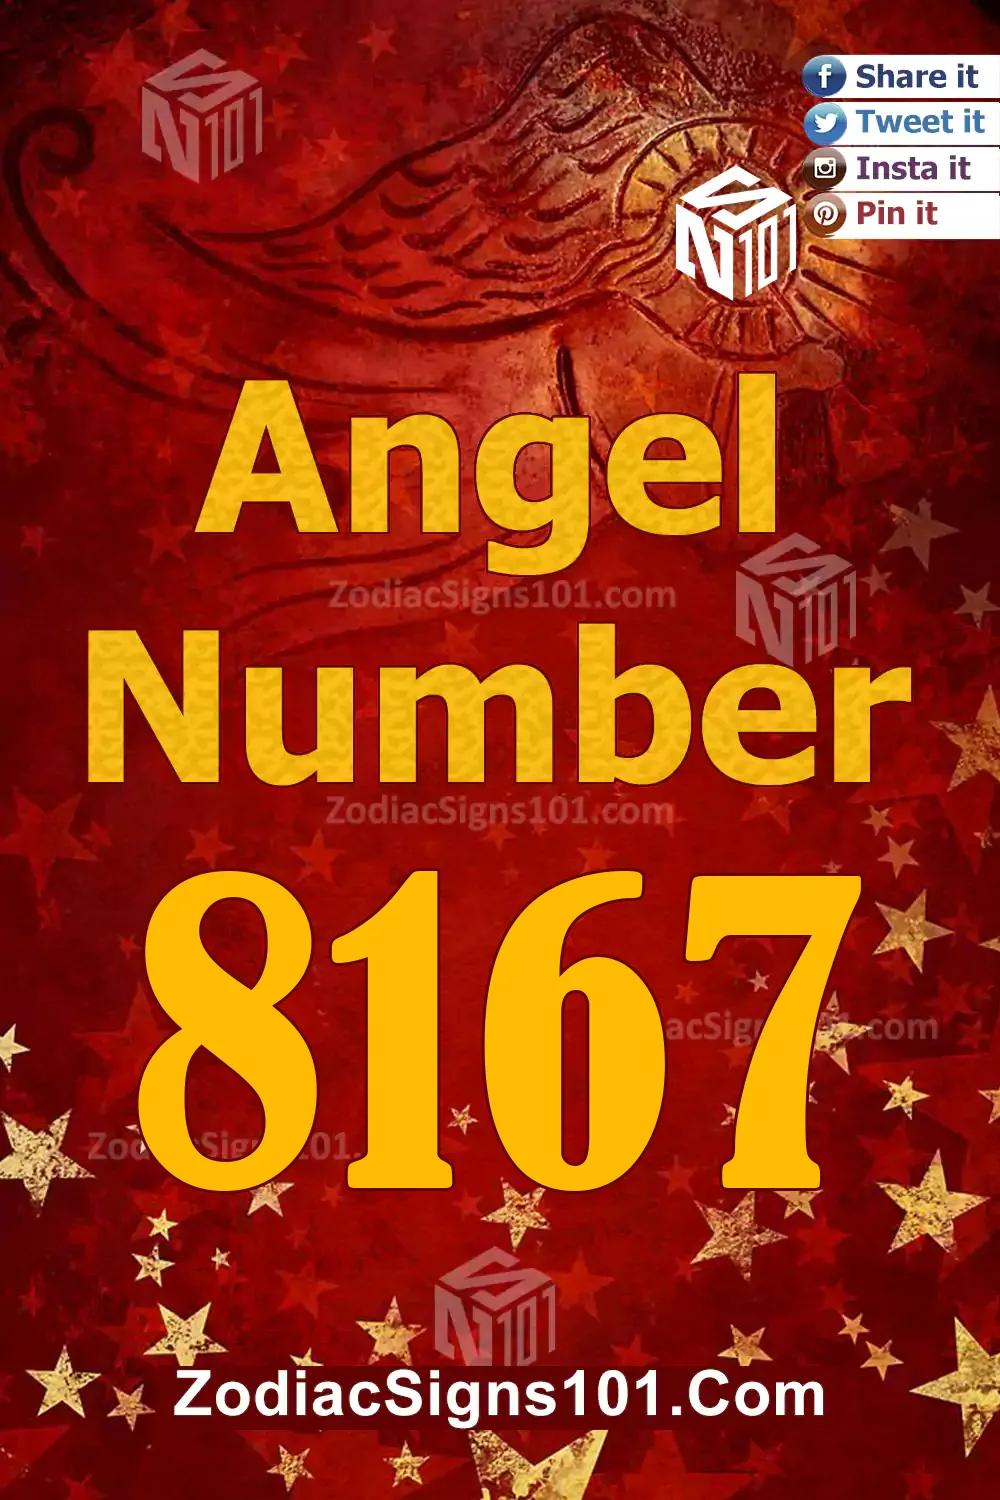 8167 Angel Number Meaning